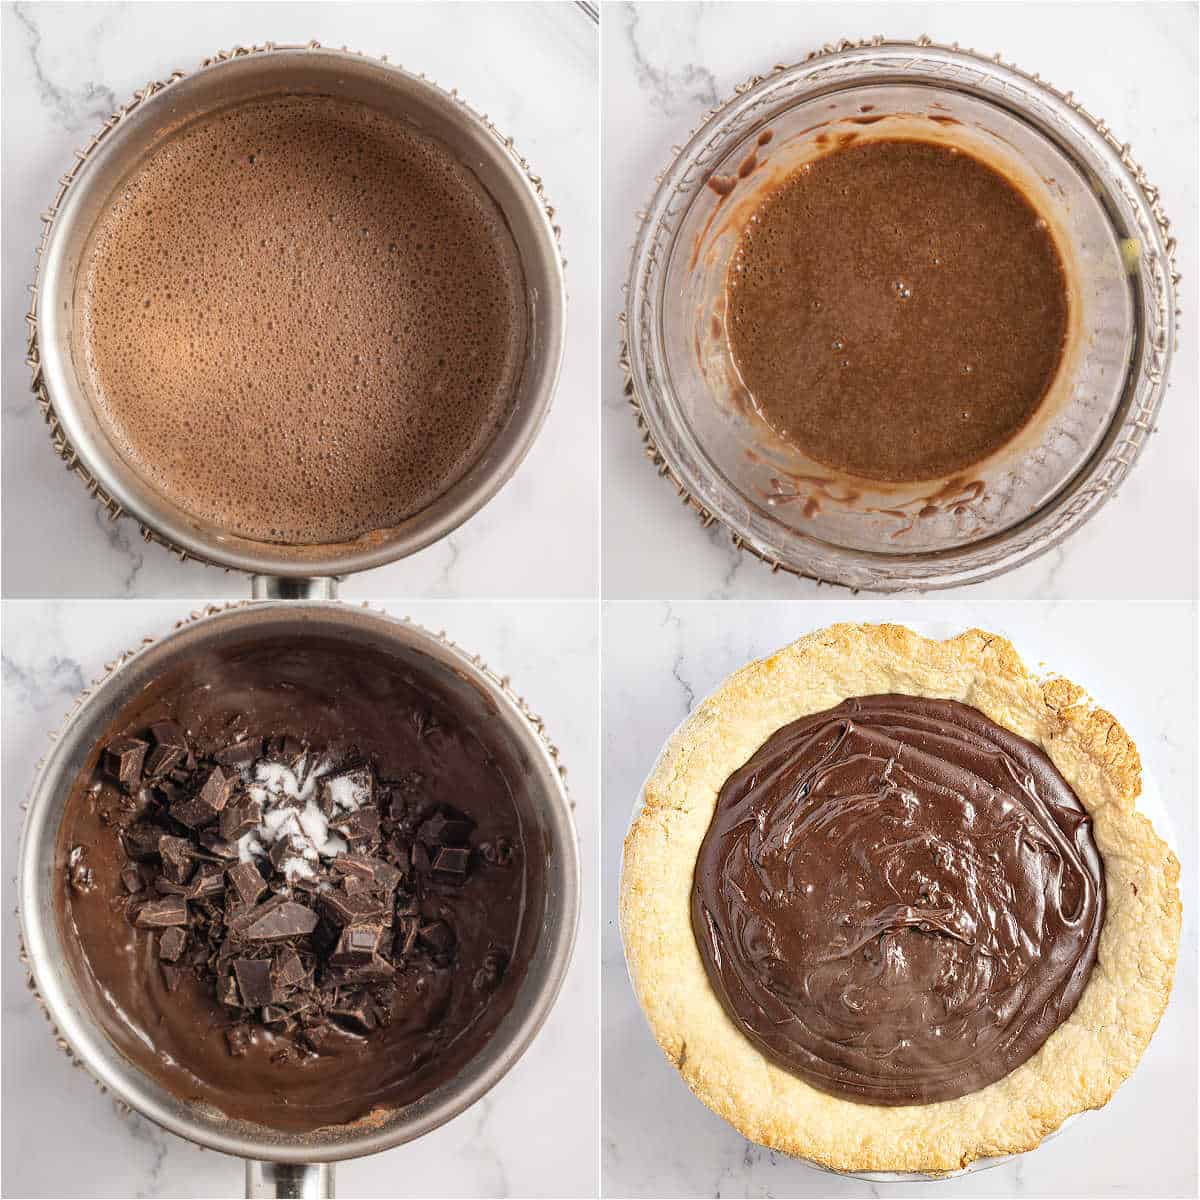 Step by step photos showing how to make chocolate pie filling from scratch.